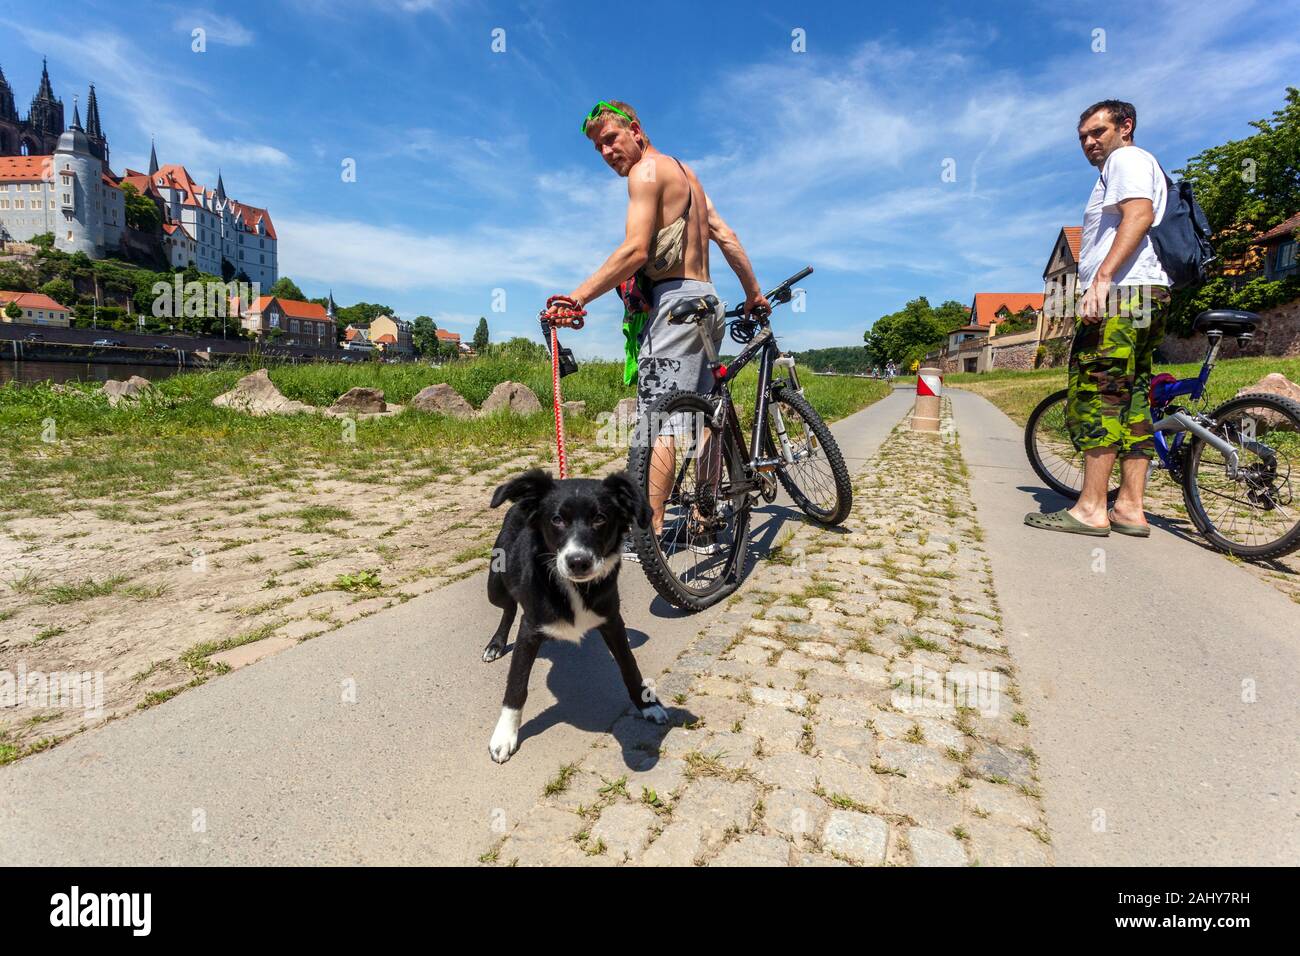 Two men with bikes and dog on leash Germany cycle path along Elbe river Meissen Saxony cyclist dog Stock Photo